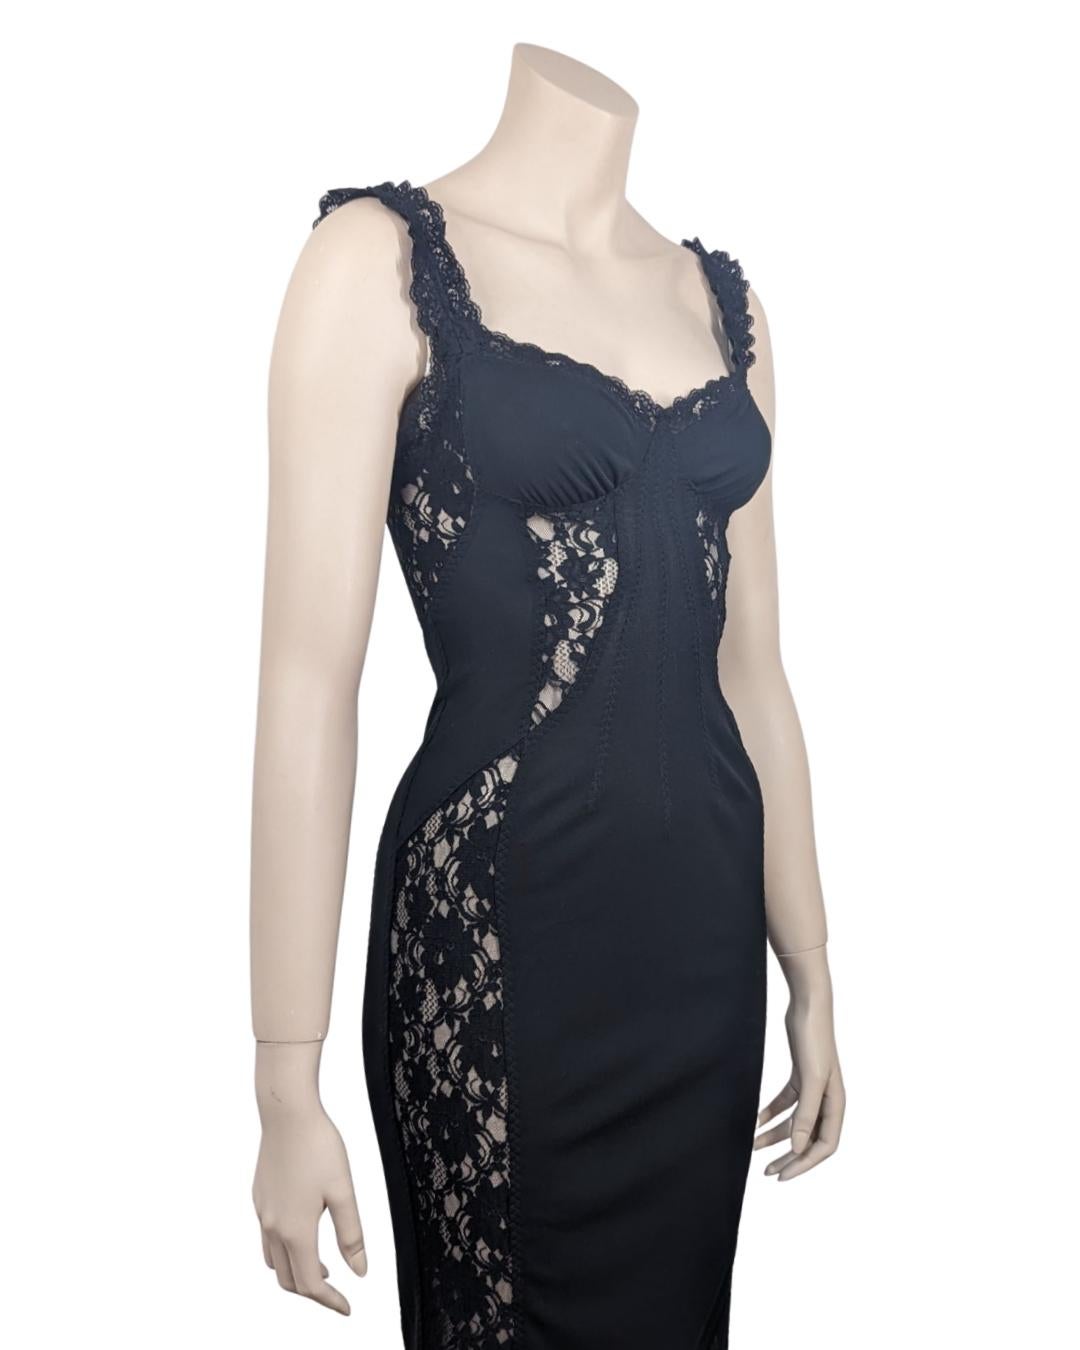 D&G by Dolce & Gabbana Fall Winter 2003 Laces Insert Midi Dress For Sale 4